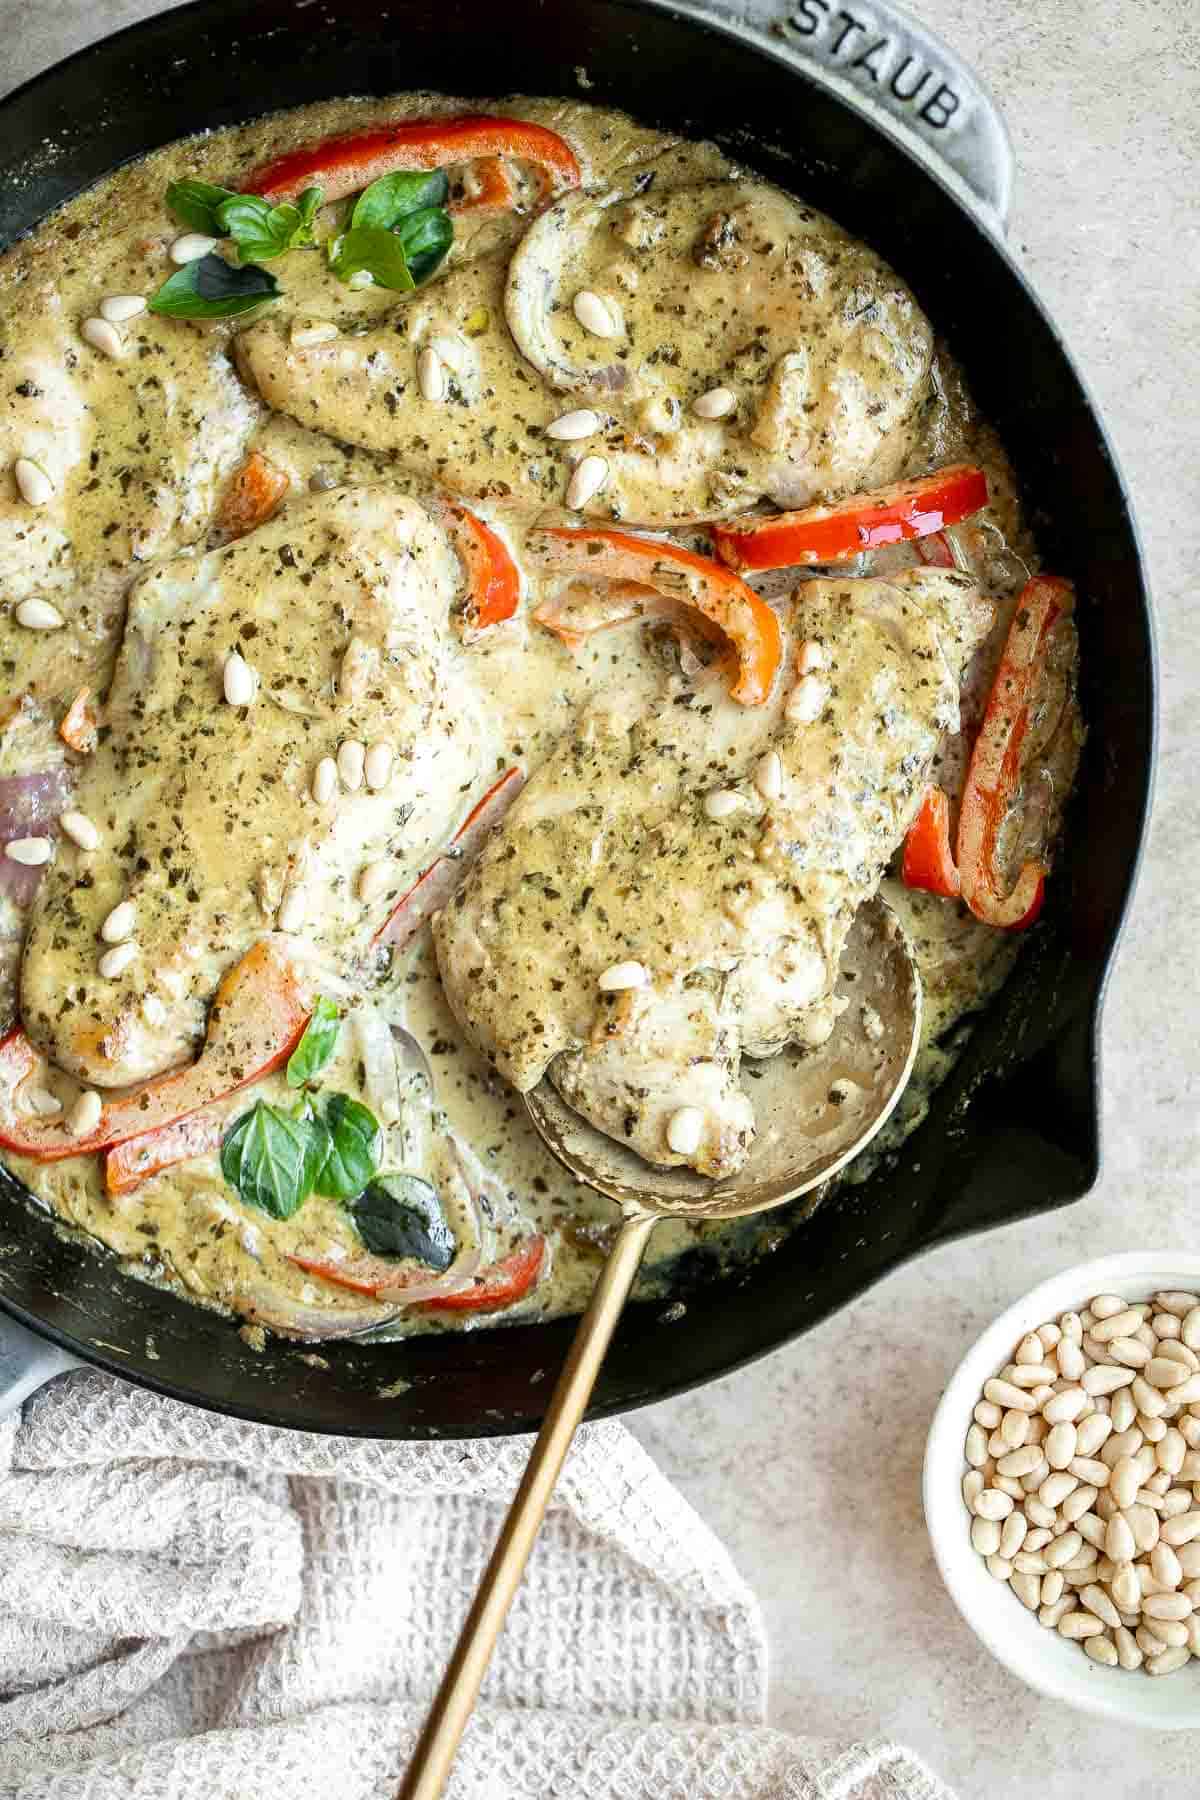 Creamy Pesto Chicken is a quick and easy 30 minute meal that needs to be on your family weeknight dinner rotation. It's rich, creamy, and delicious. | aheadofthyme.com